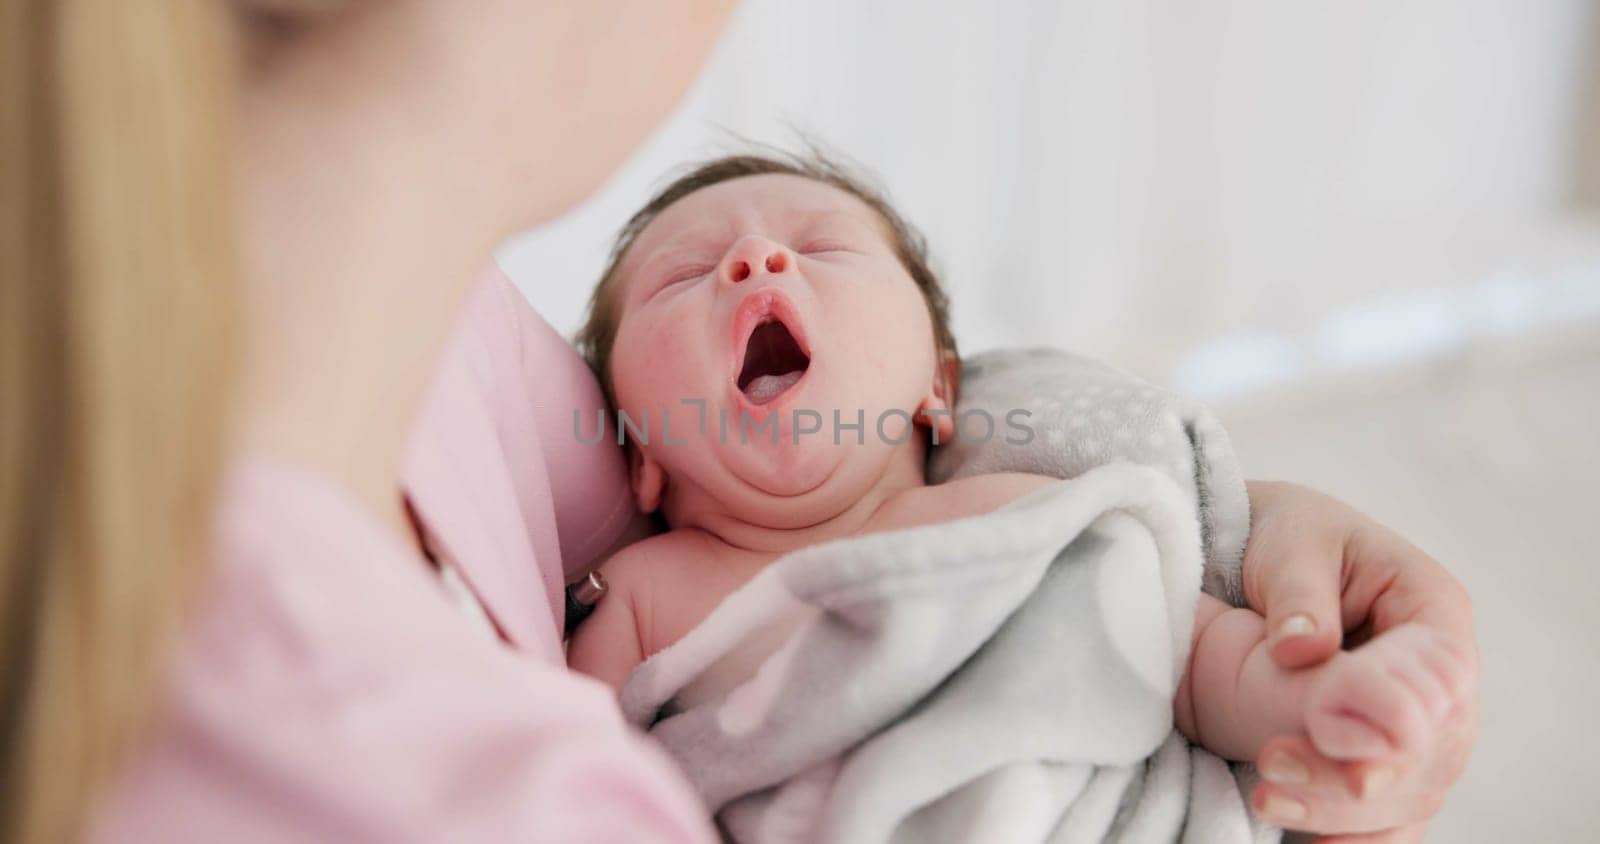 Baby, yawn and calm with tired newborn and mom in a bedroom at morning with care. Rest, relax and young kid with fatigue and mother support in a family home with motherhood in house with blanket.